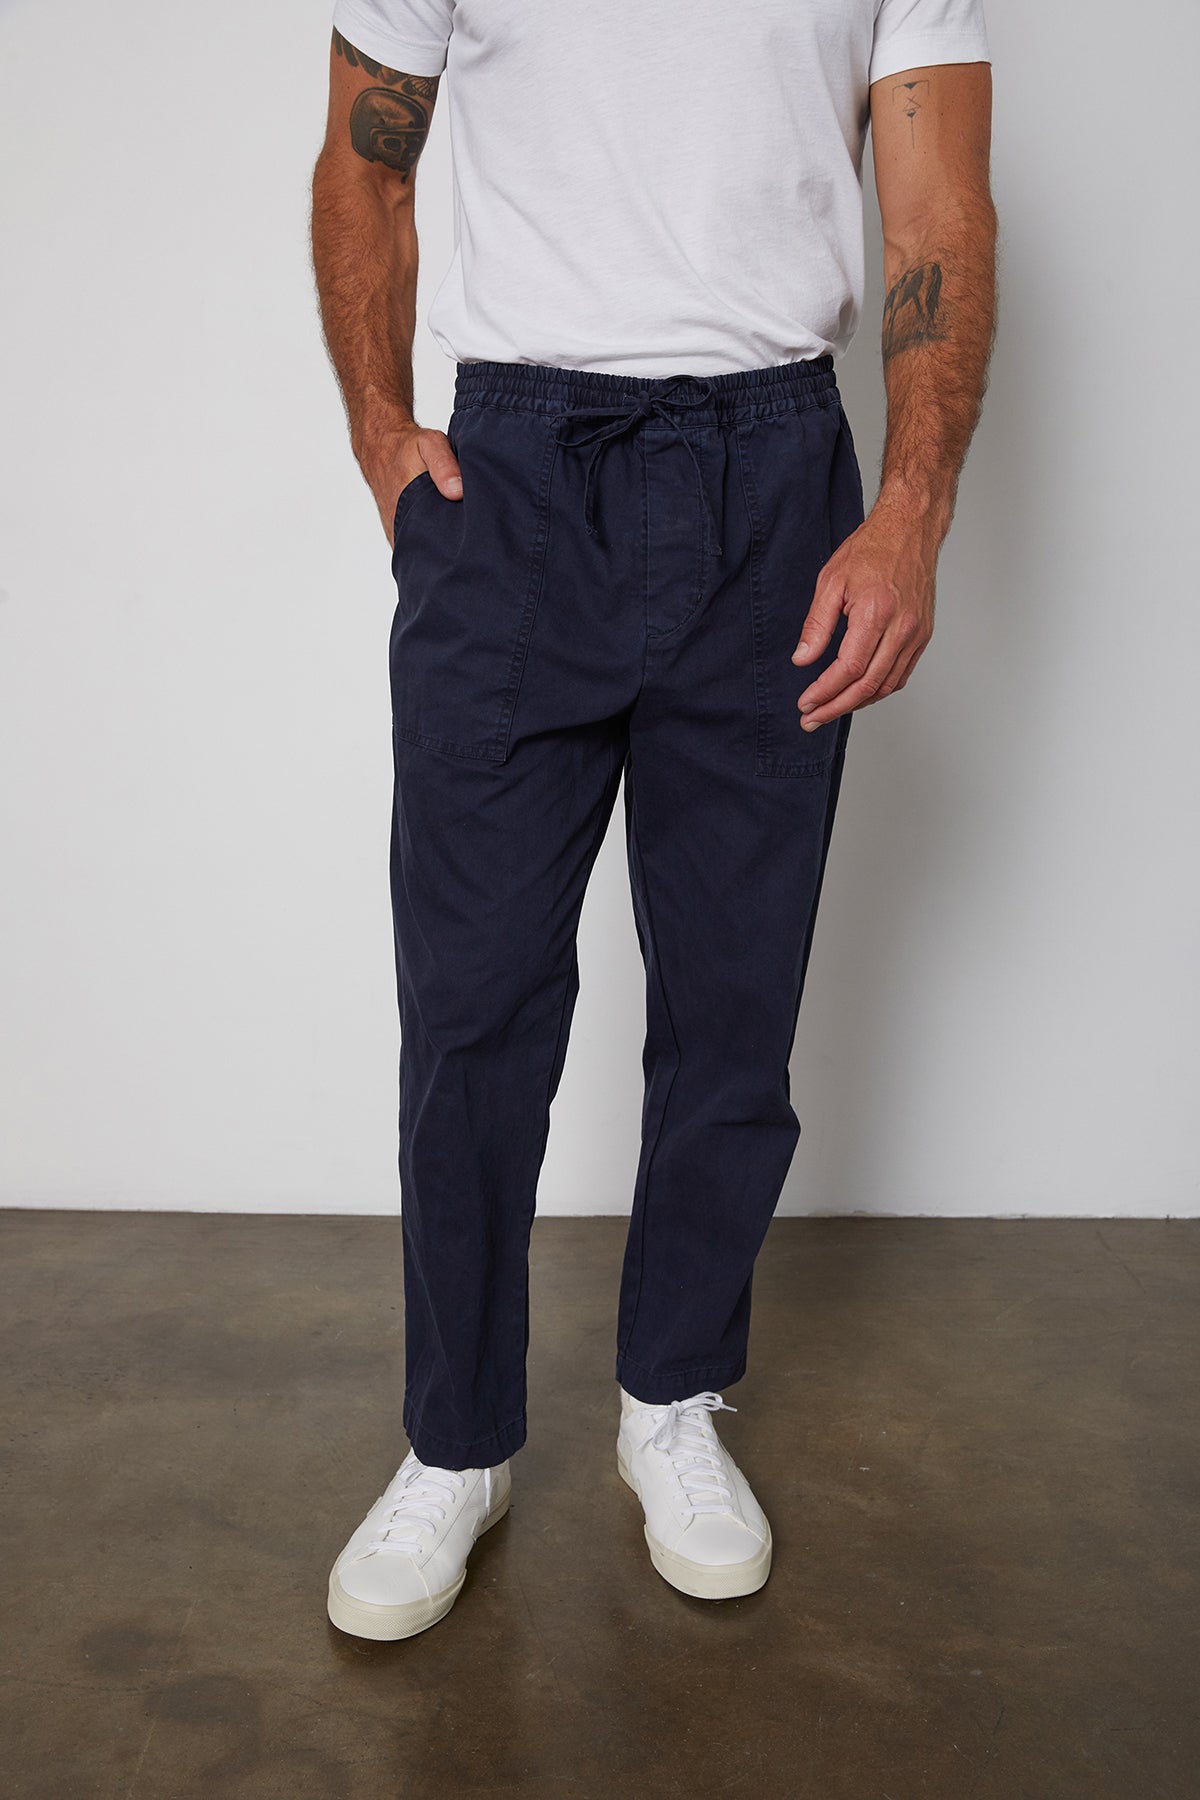 will in navy front pant-24148957561025